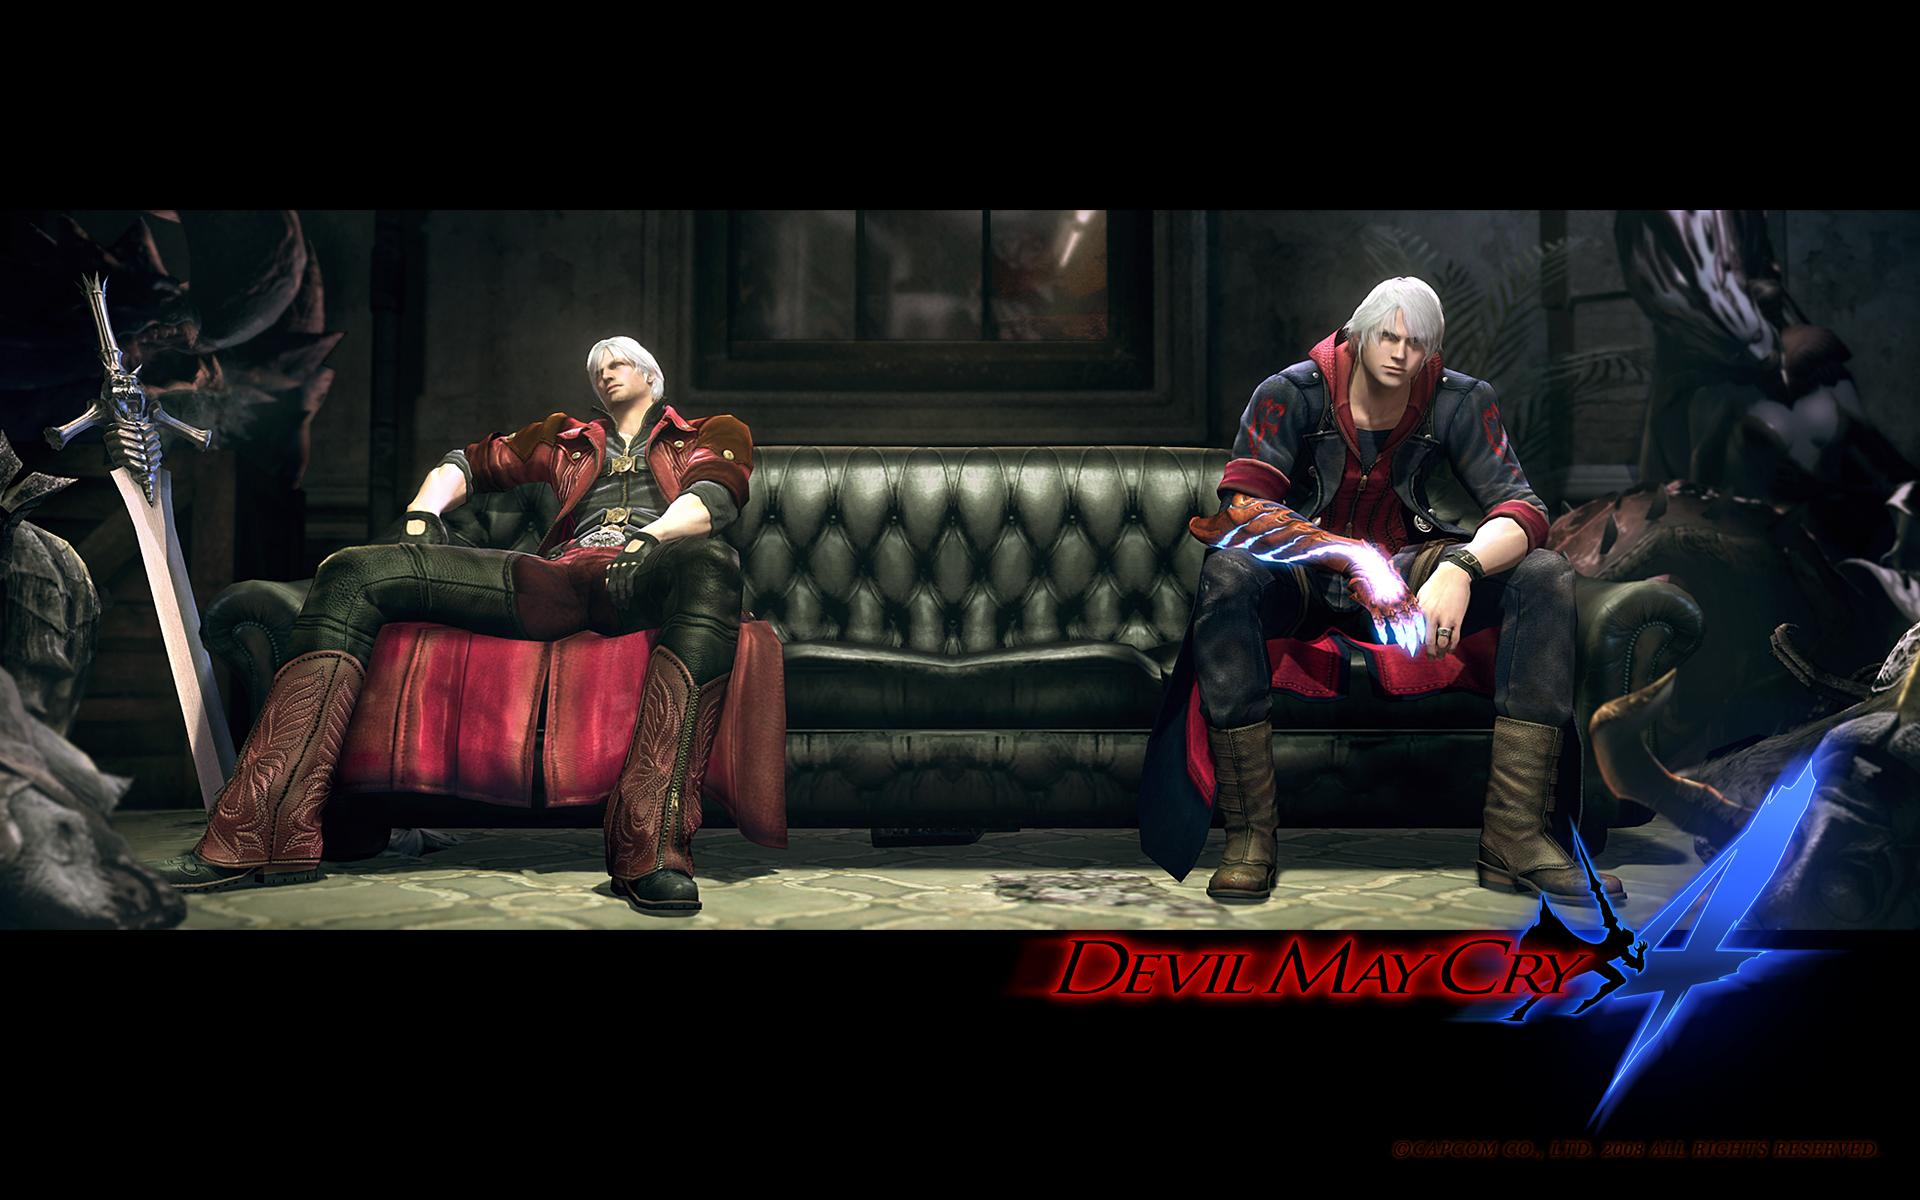 Devil May Cry 4 Dante and Nero Wallpaper | Customity